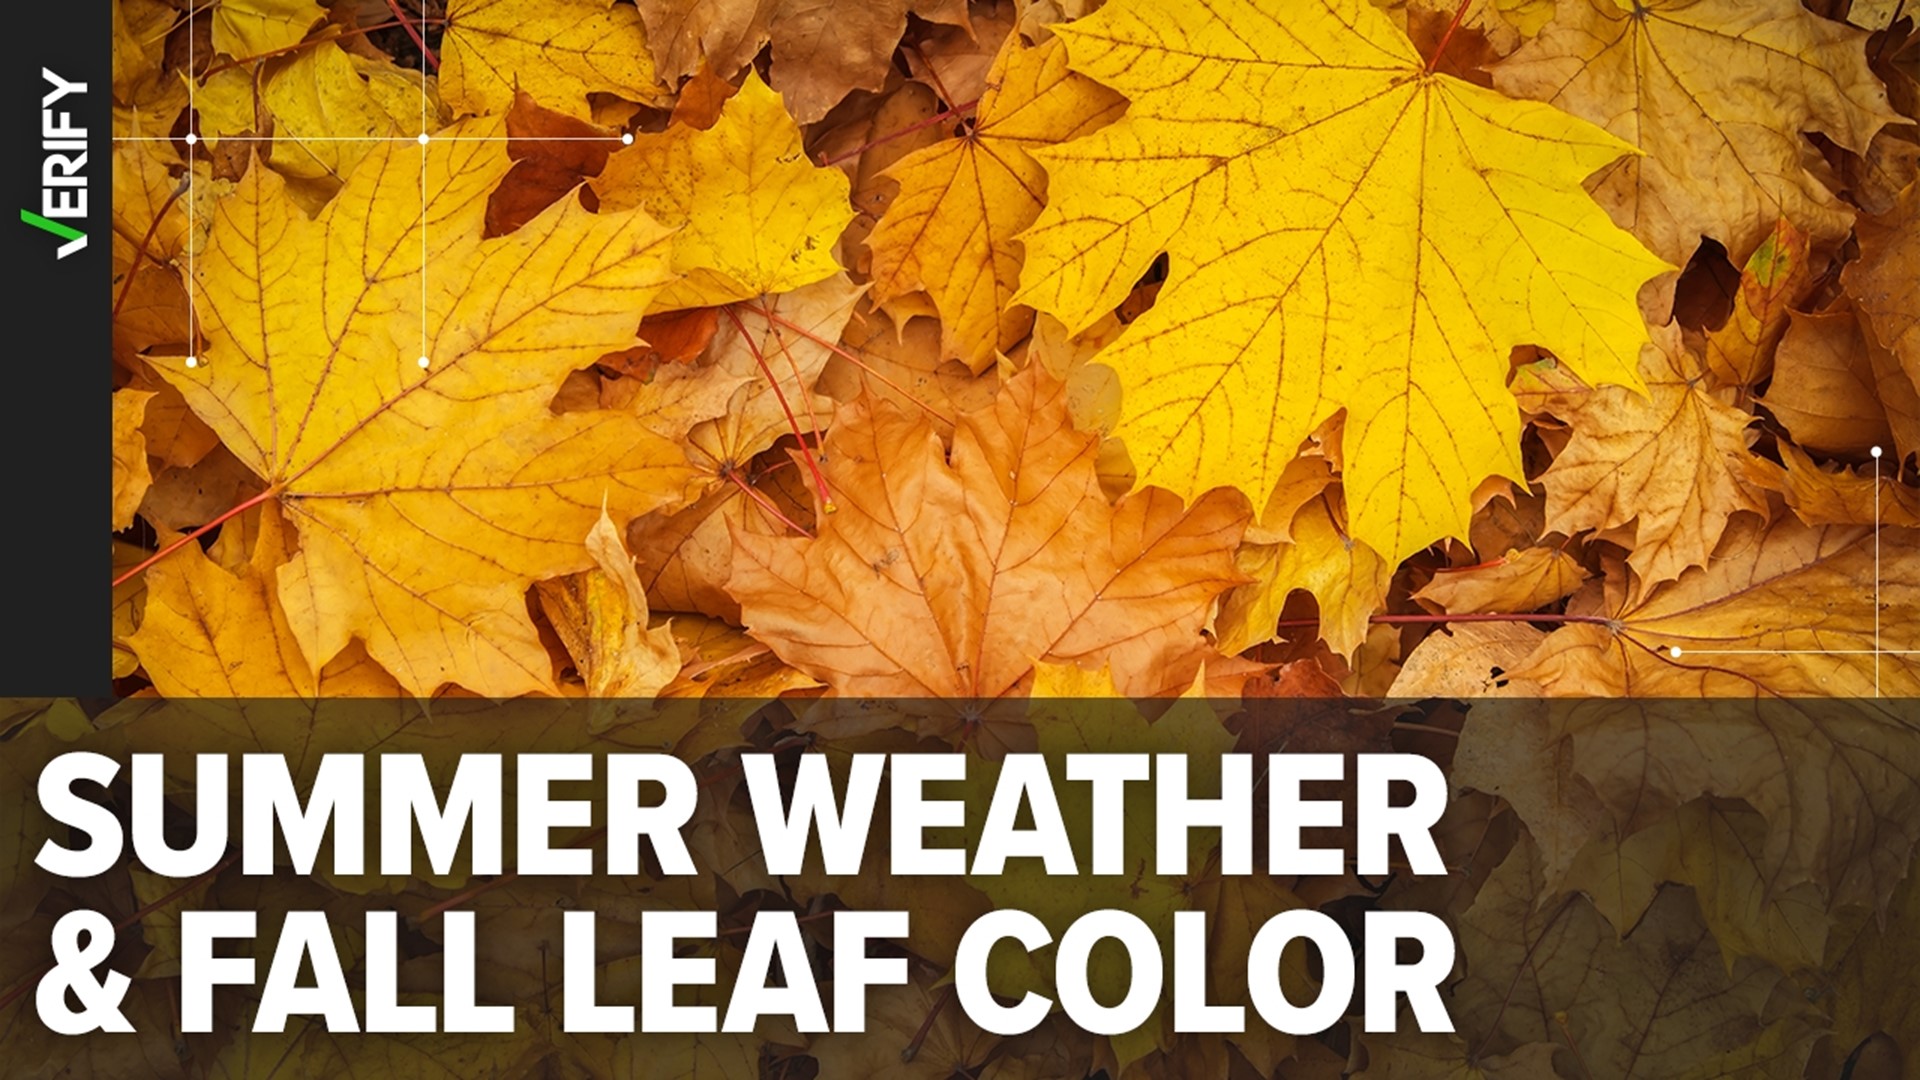 Summer weather conditions determine whether fall leaves are vibrant or mediocre.